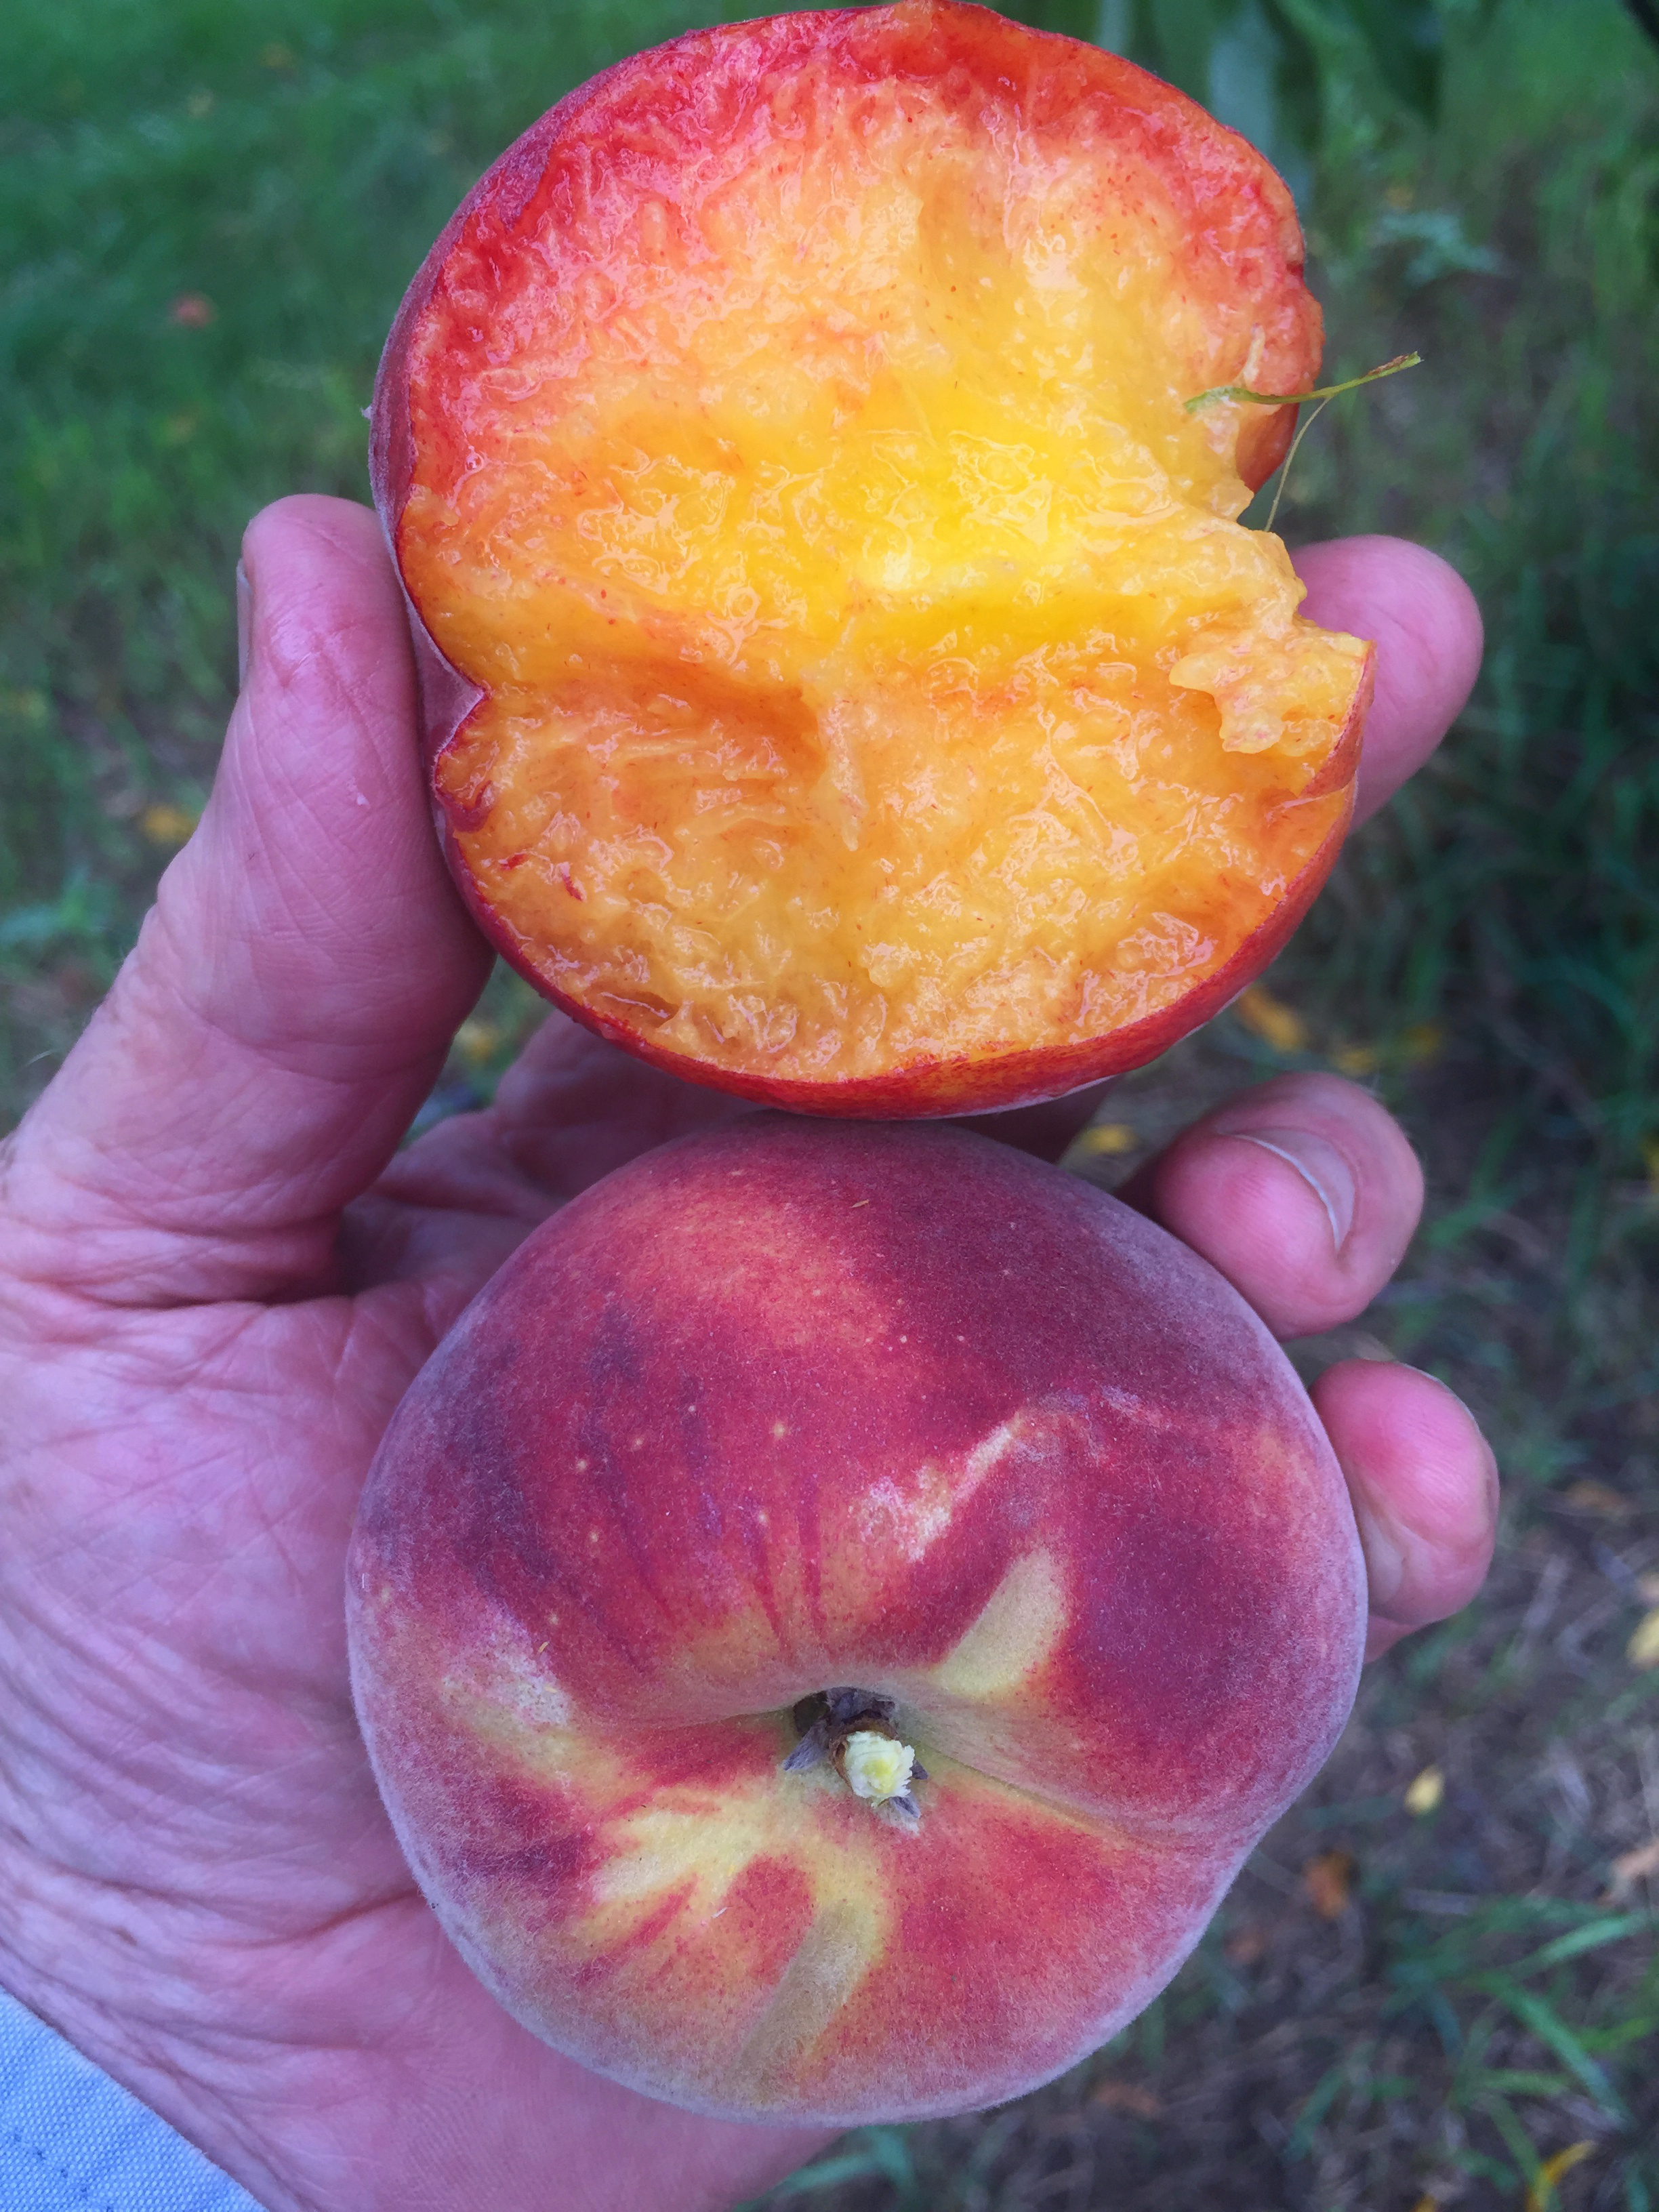 Peaches cut open and red color bleeding into the flesh.